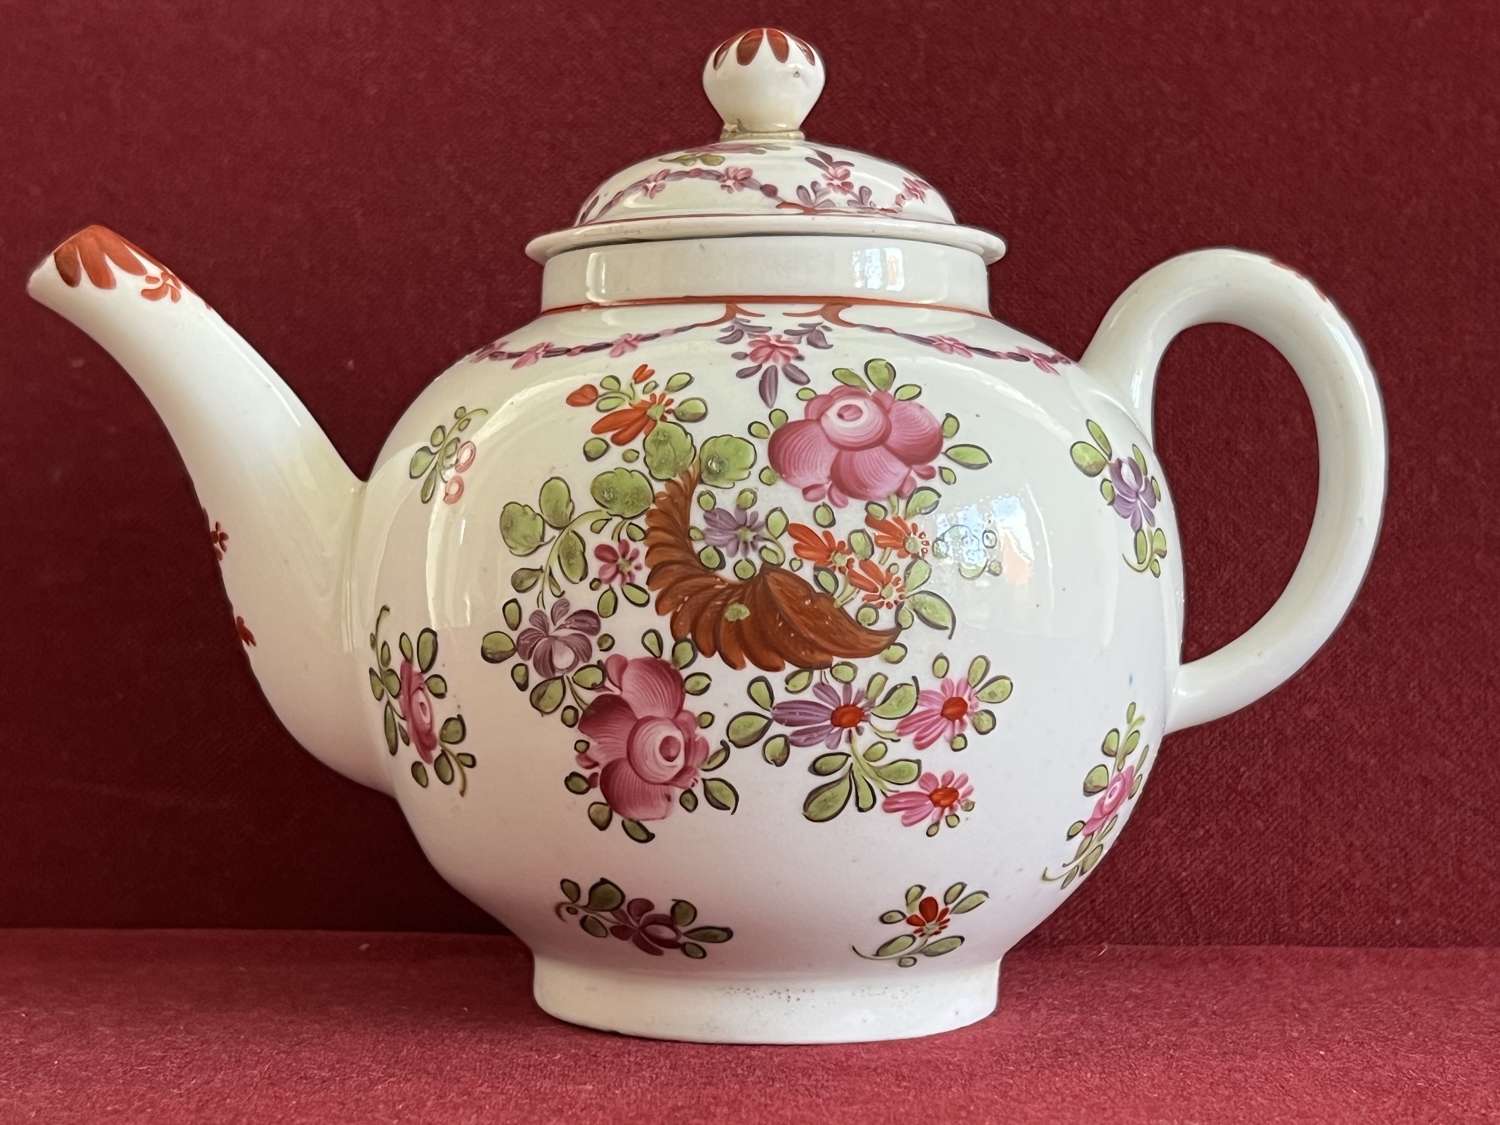 A Lowestoft Porcelain Curtis Pattern Teapot and Cover c.1785